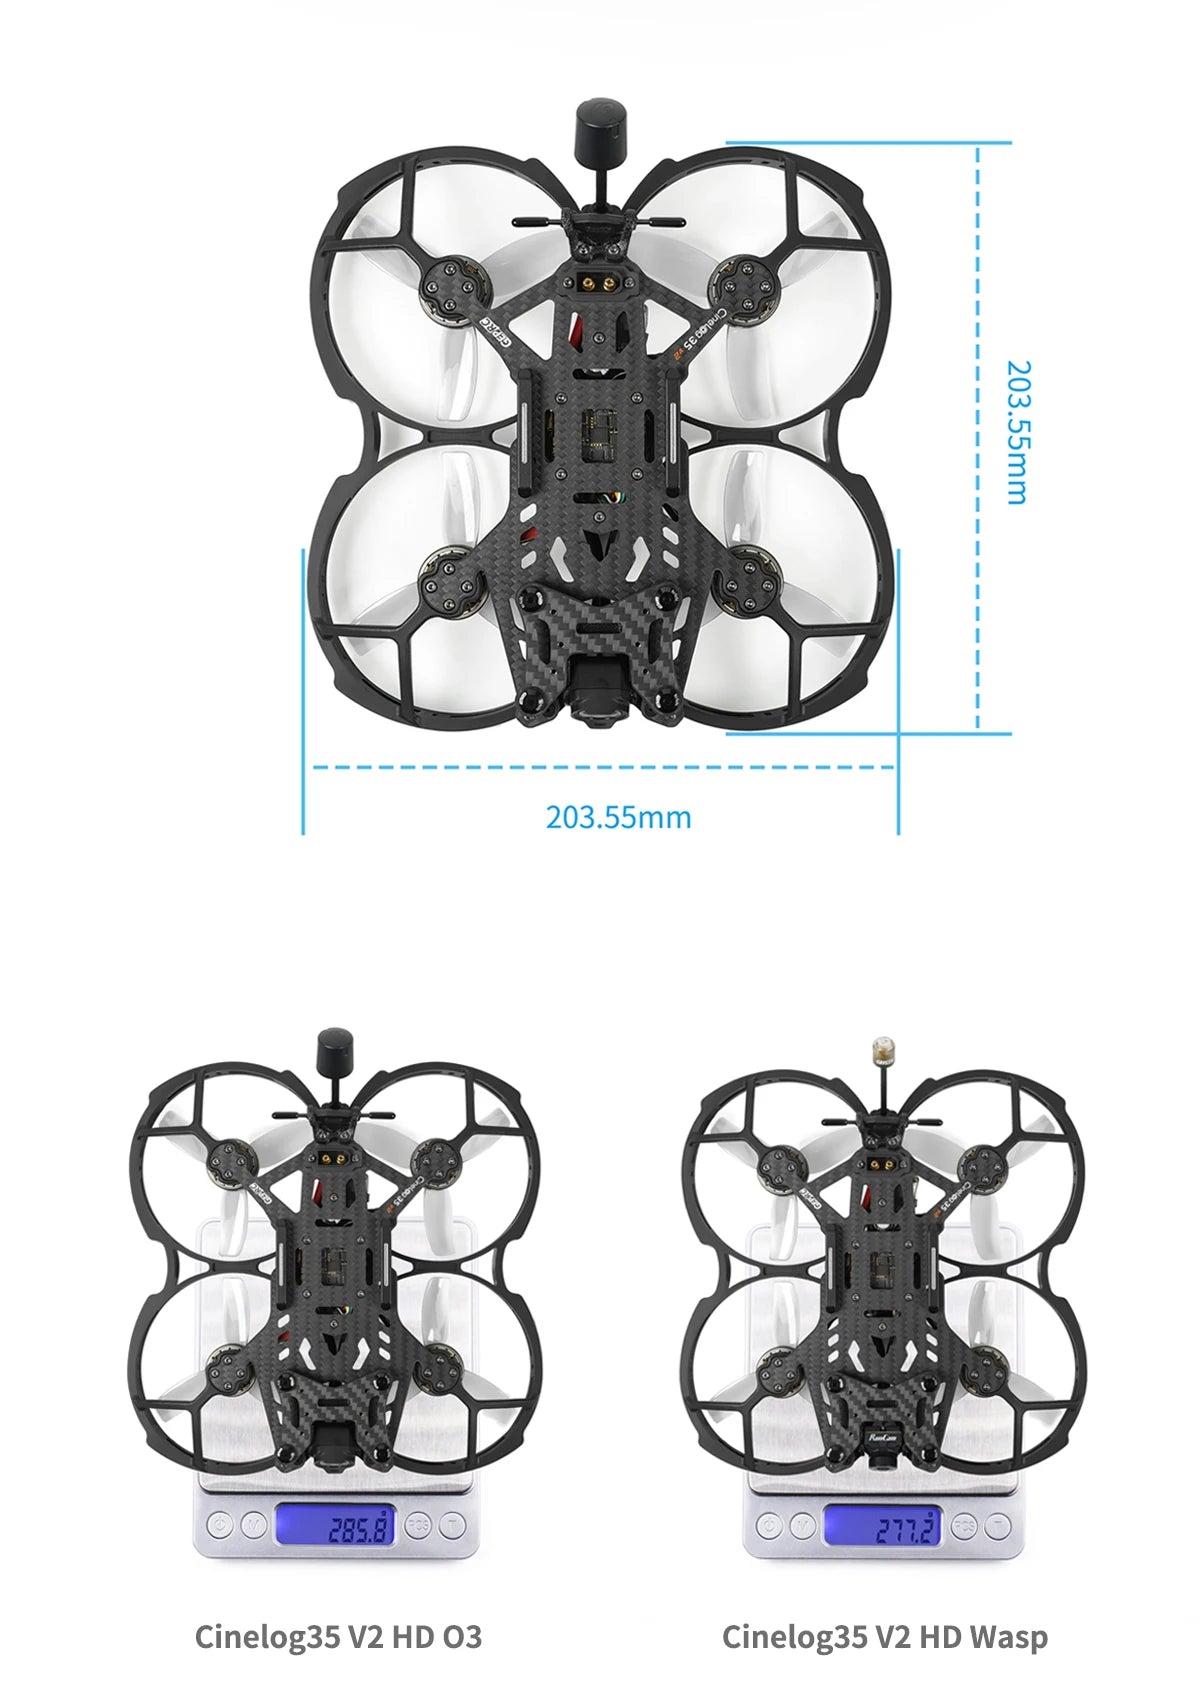 GEPRC CineLog35 V2 HD, this is a 3.5-inch HD FPV cinematic drone . it integrate